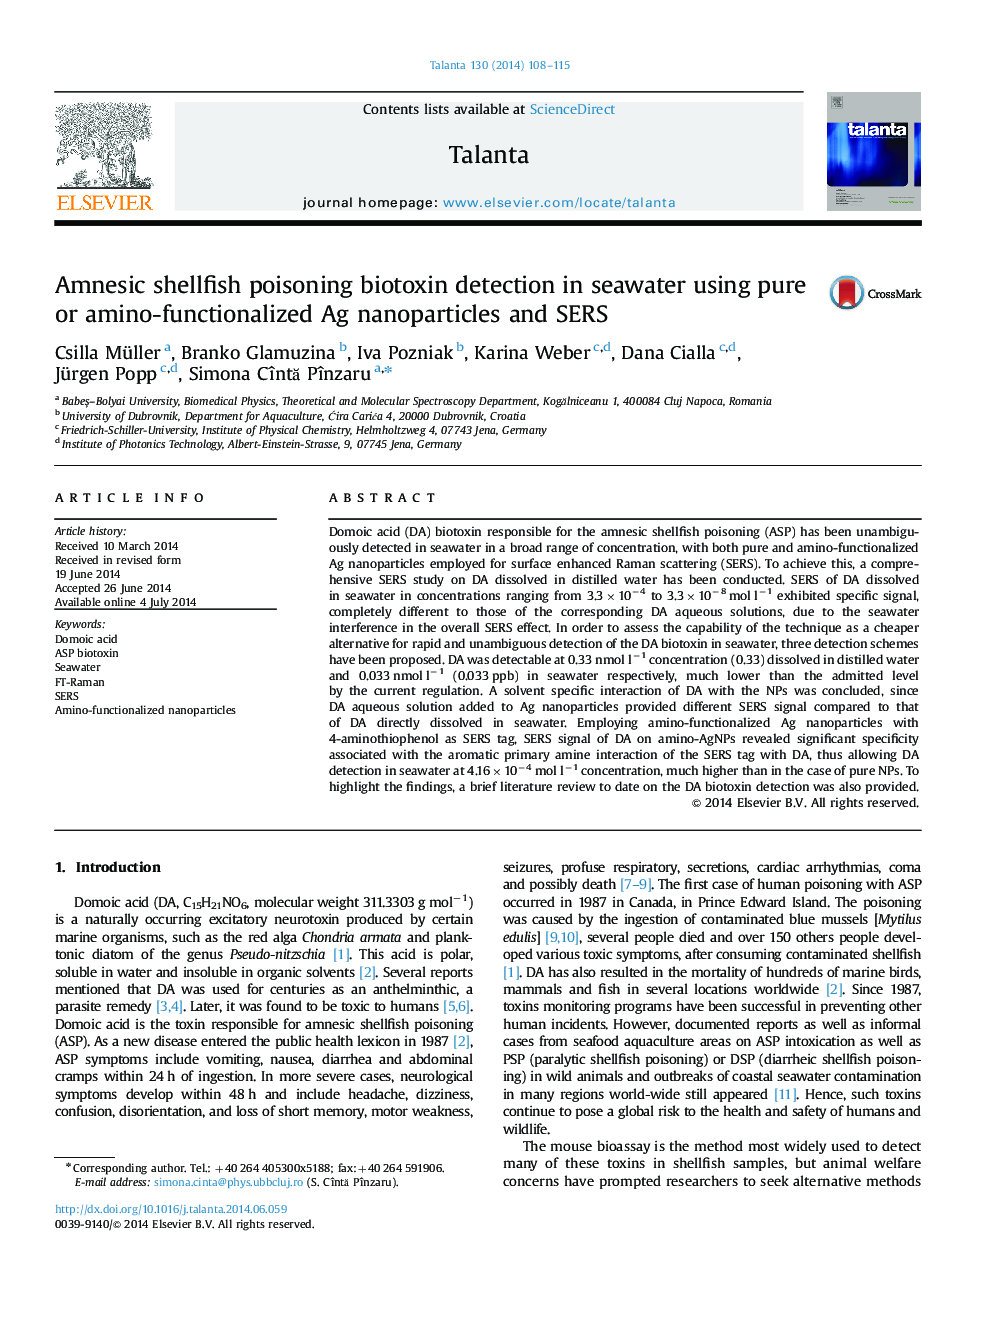 Amnesic shellfish poisoning biotoxin detection in seawater using pure or amino-functionalized Ag nanoparticles and SERS